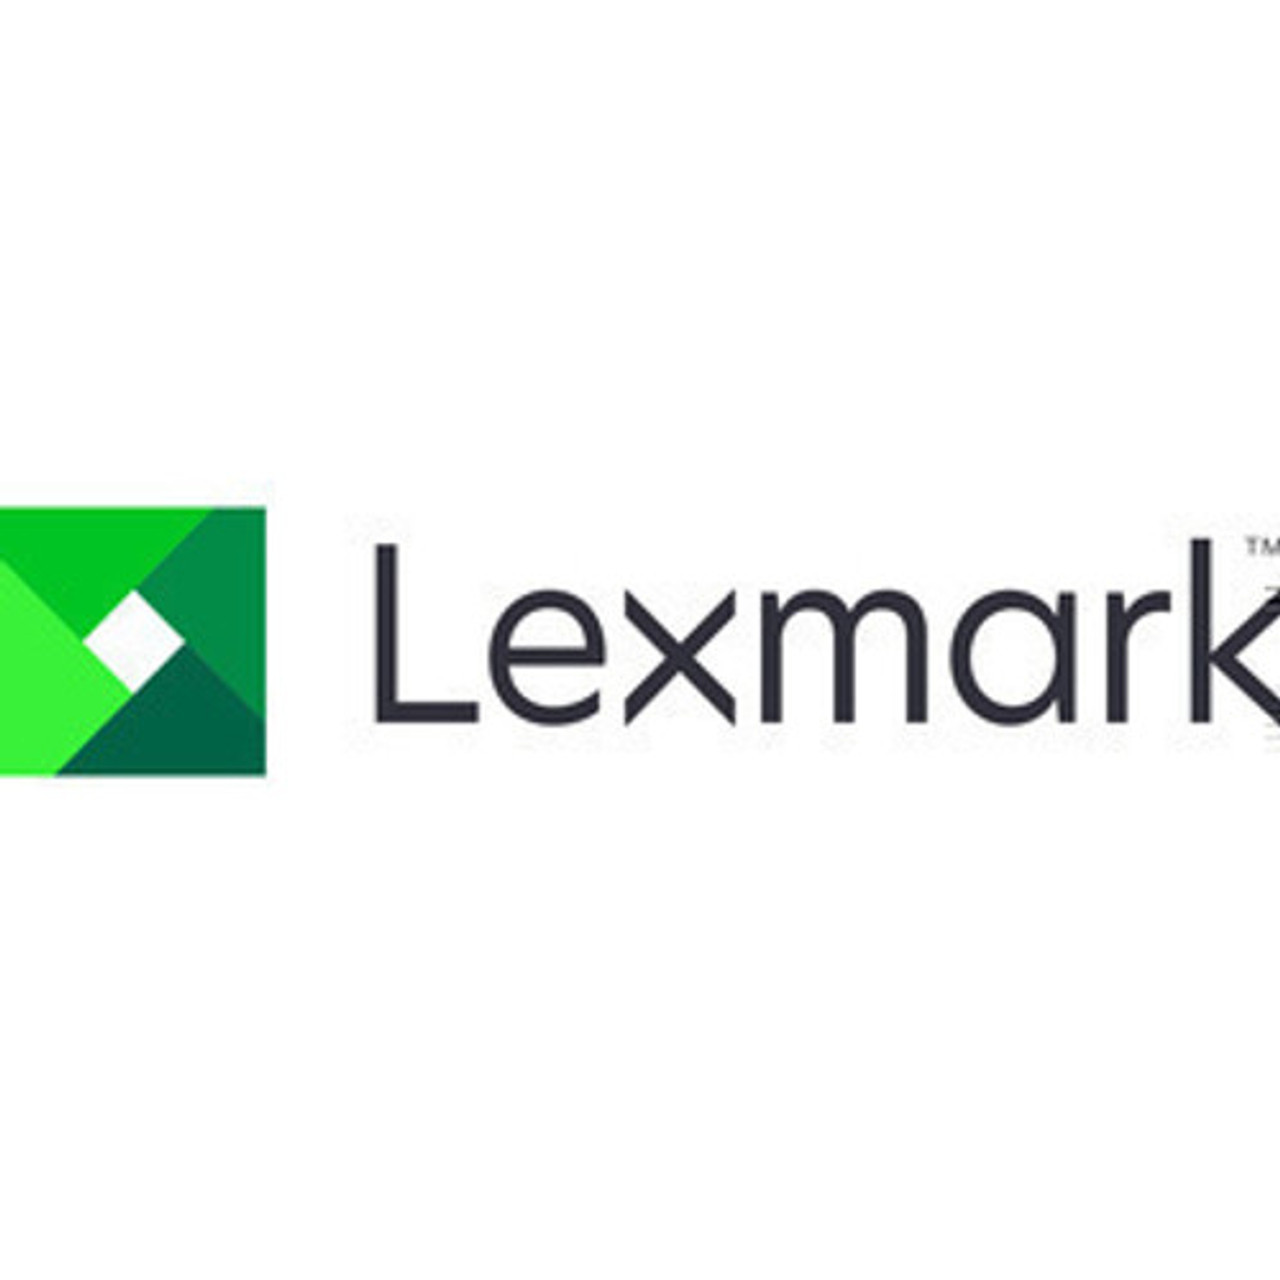 Lexmark 1YR PARTS ONLY MS631   SVCS - 2374838